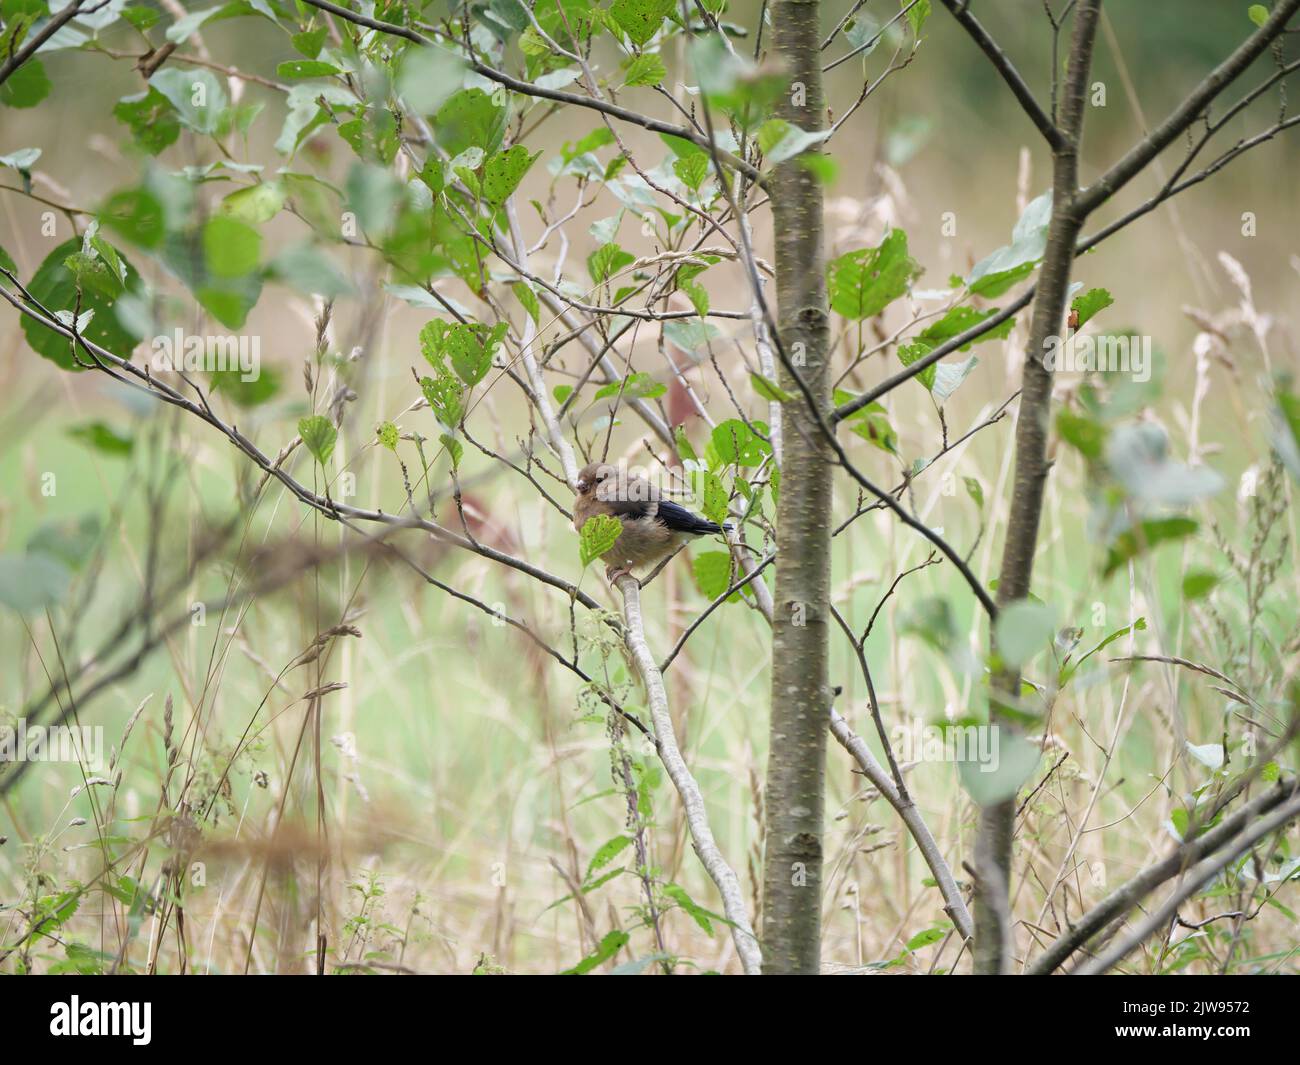 A young bullfinch sits in a bush and is fed by its mother Stock Photo